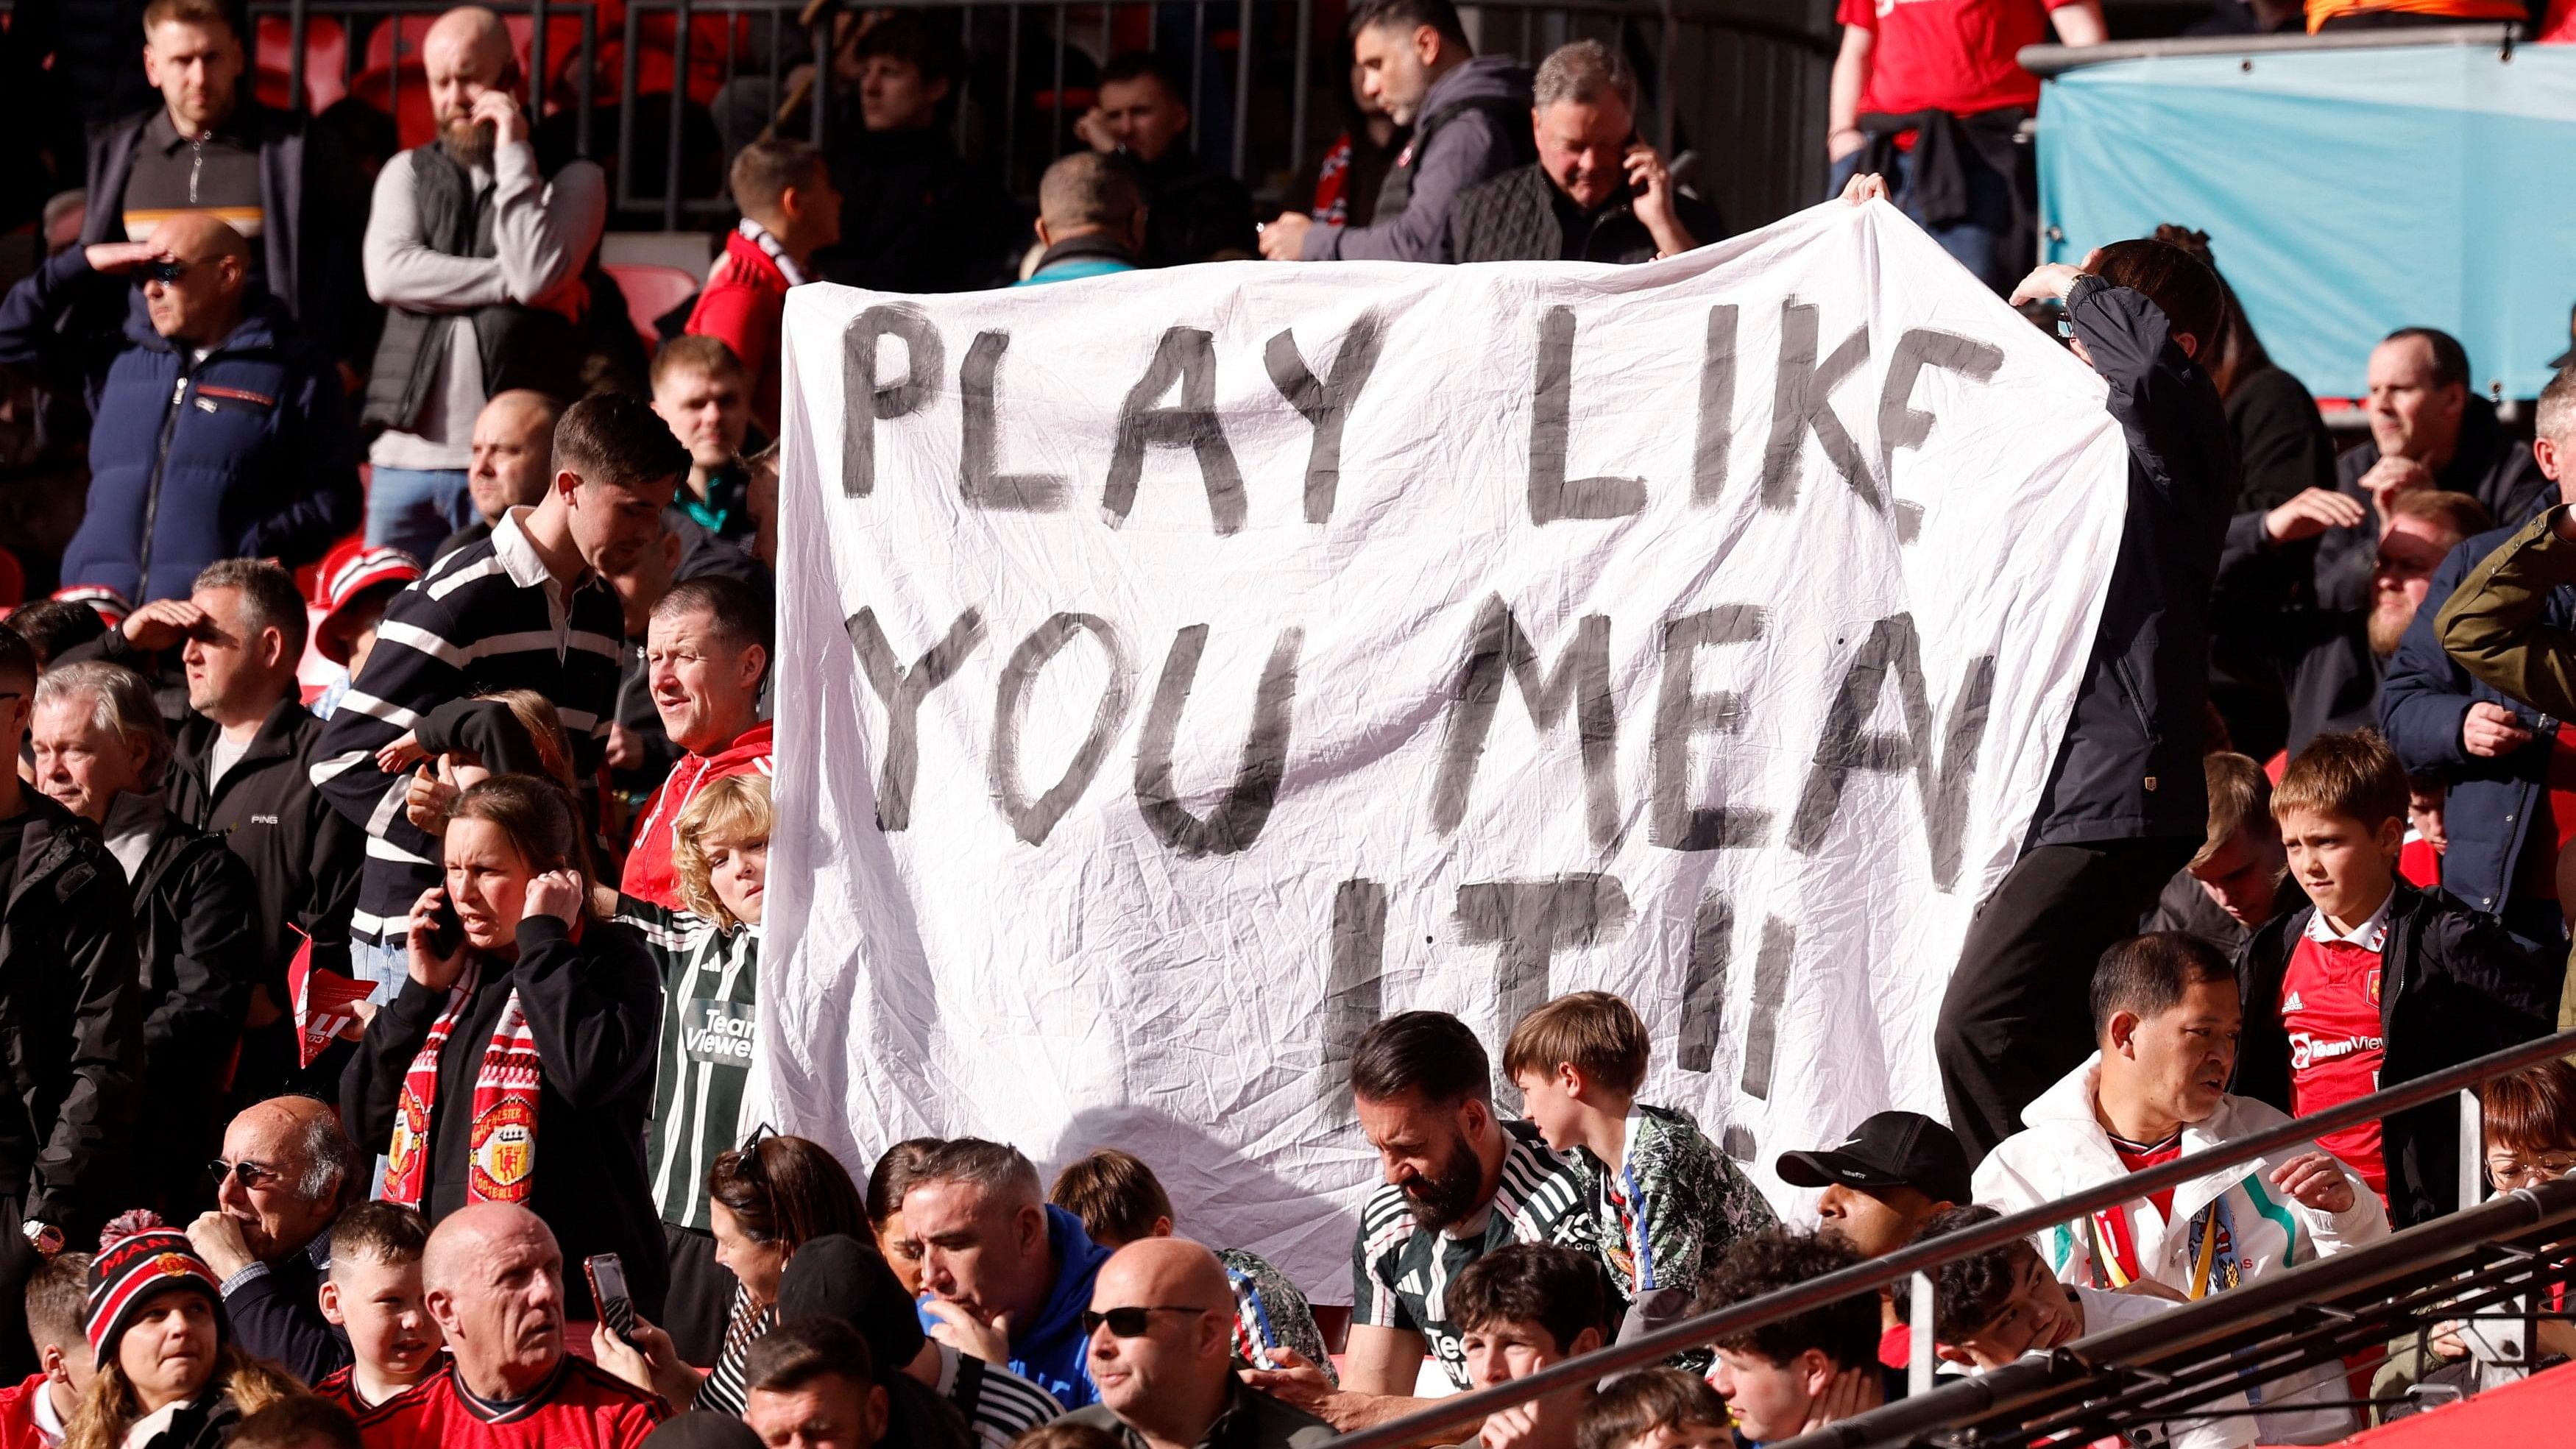 <div class="paragraphs"><p>Manchester United fans display a banner in the stands during the club's FA Cup match against Coventry City.</p></div>